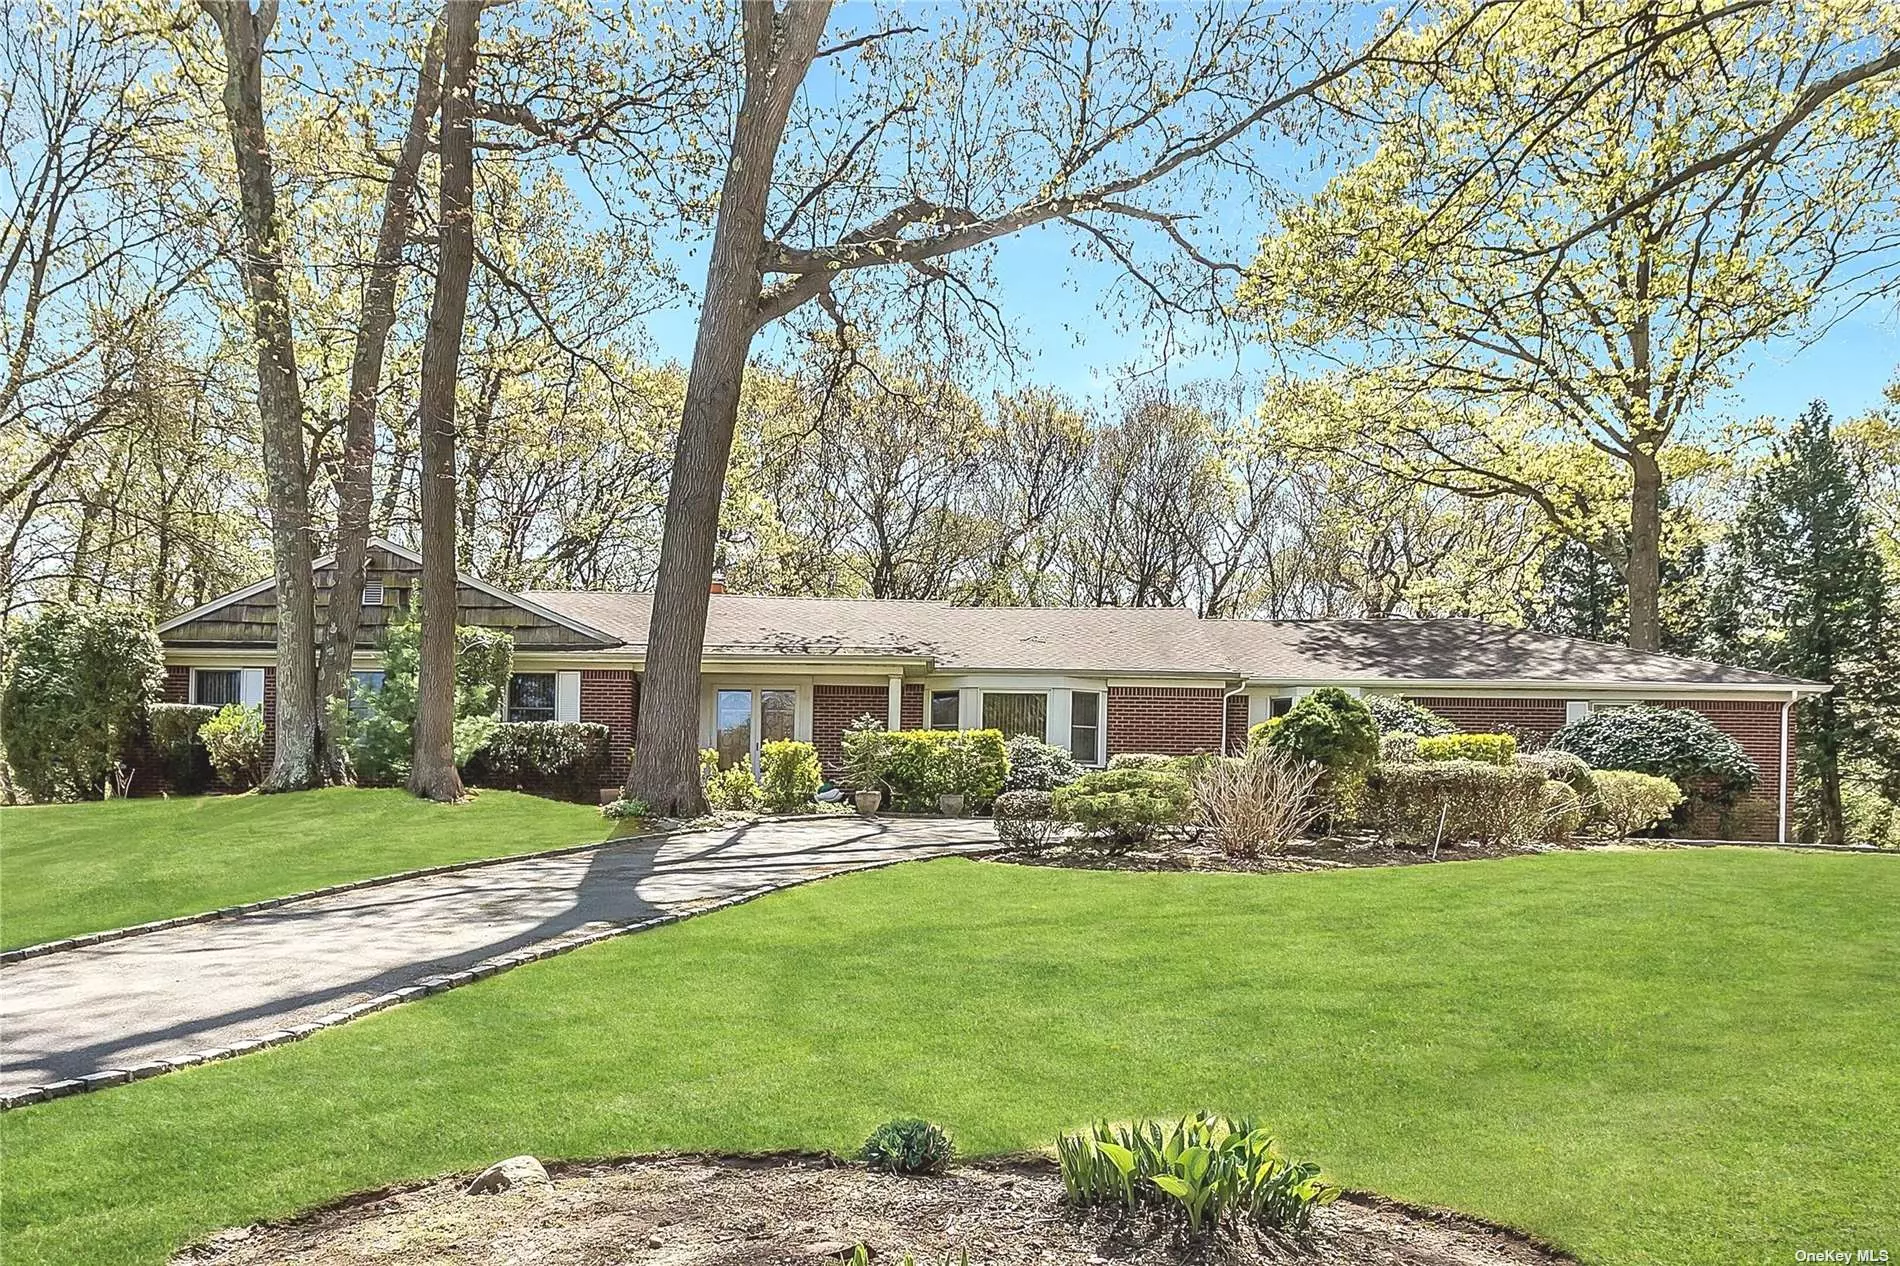 Sprawling Brick Ranch located in North Syosset at the end of a quiet cul-de-sac. Situated on 2 acres of professionally landscaped property complete with Inground Salt Water Pool, Patio and manicured yard. Circular Driveway leads to double door entry with inviting foyer. Spacious Great Room with high ceilings, skylight, fireplace and glass doors to the backyard. Eat in Kitchen with Gas Cooking and glass doors to the backyard lend to effortless entertaining. The bedroom wing is complete with a master suite plus 3 bedrooms and the fifth bedroom is on the other side of the house making it the perfect private guest room. Hardwood Floors, Full finished basement with outside entrance. Gas Cooking, Gas Heat, Central Air. New liner and new sand filter system and pool heater. Located near LIRR, airports, shopping major highways, beaches, country clubs, equestrian centers and fine dining. Syosset Schools, Berry Hill Elementary.